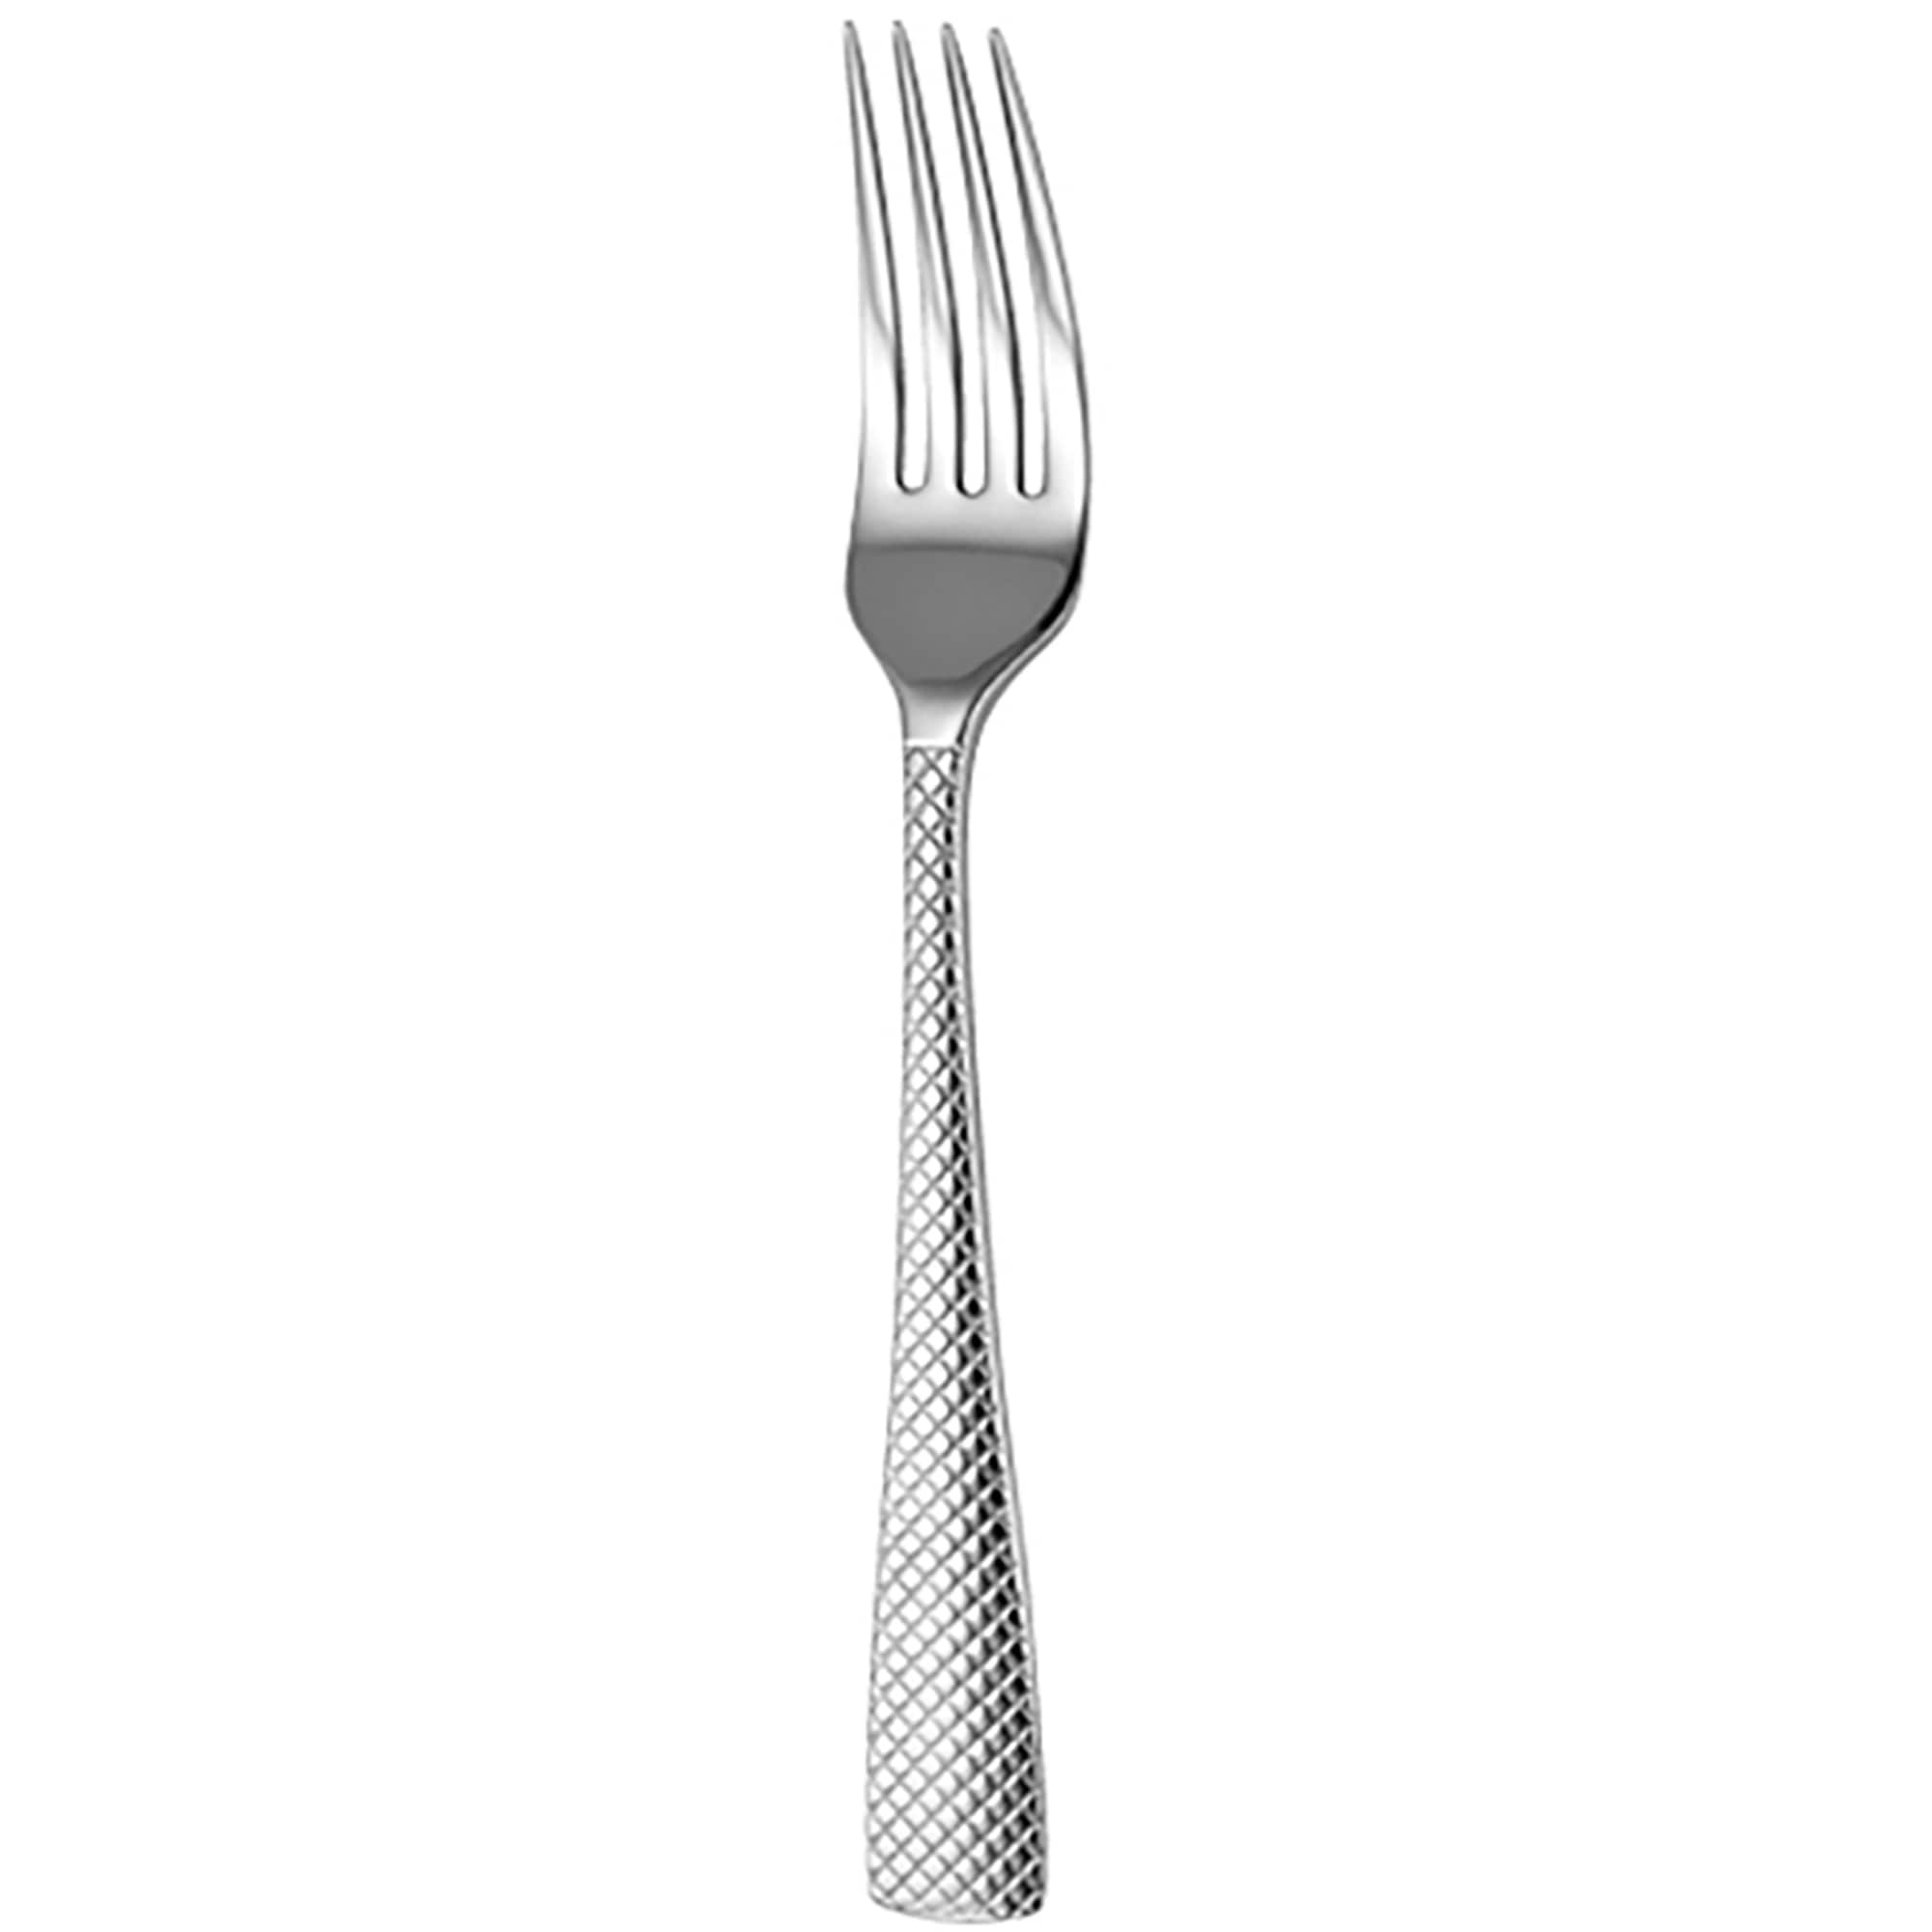 TWO SALAD FORKS-Oneida 18/10 Stainless Rope-edged handles FLUORISH 